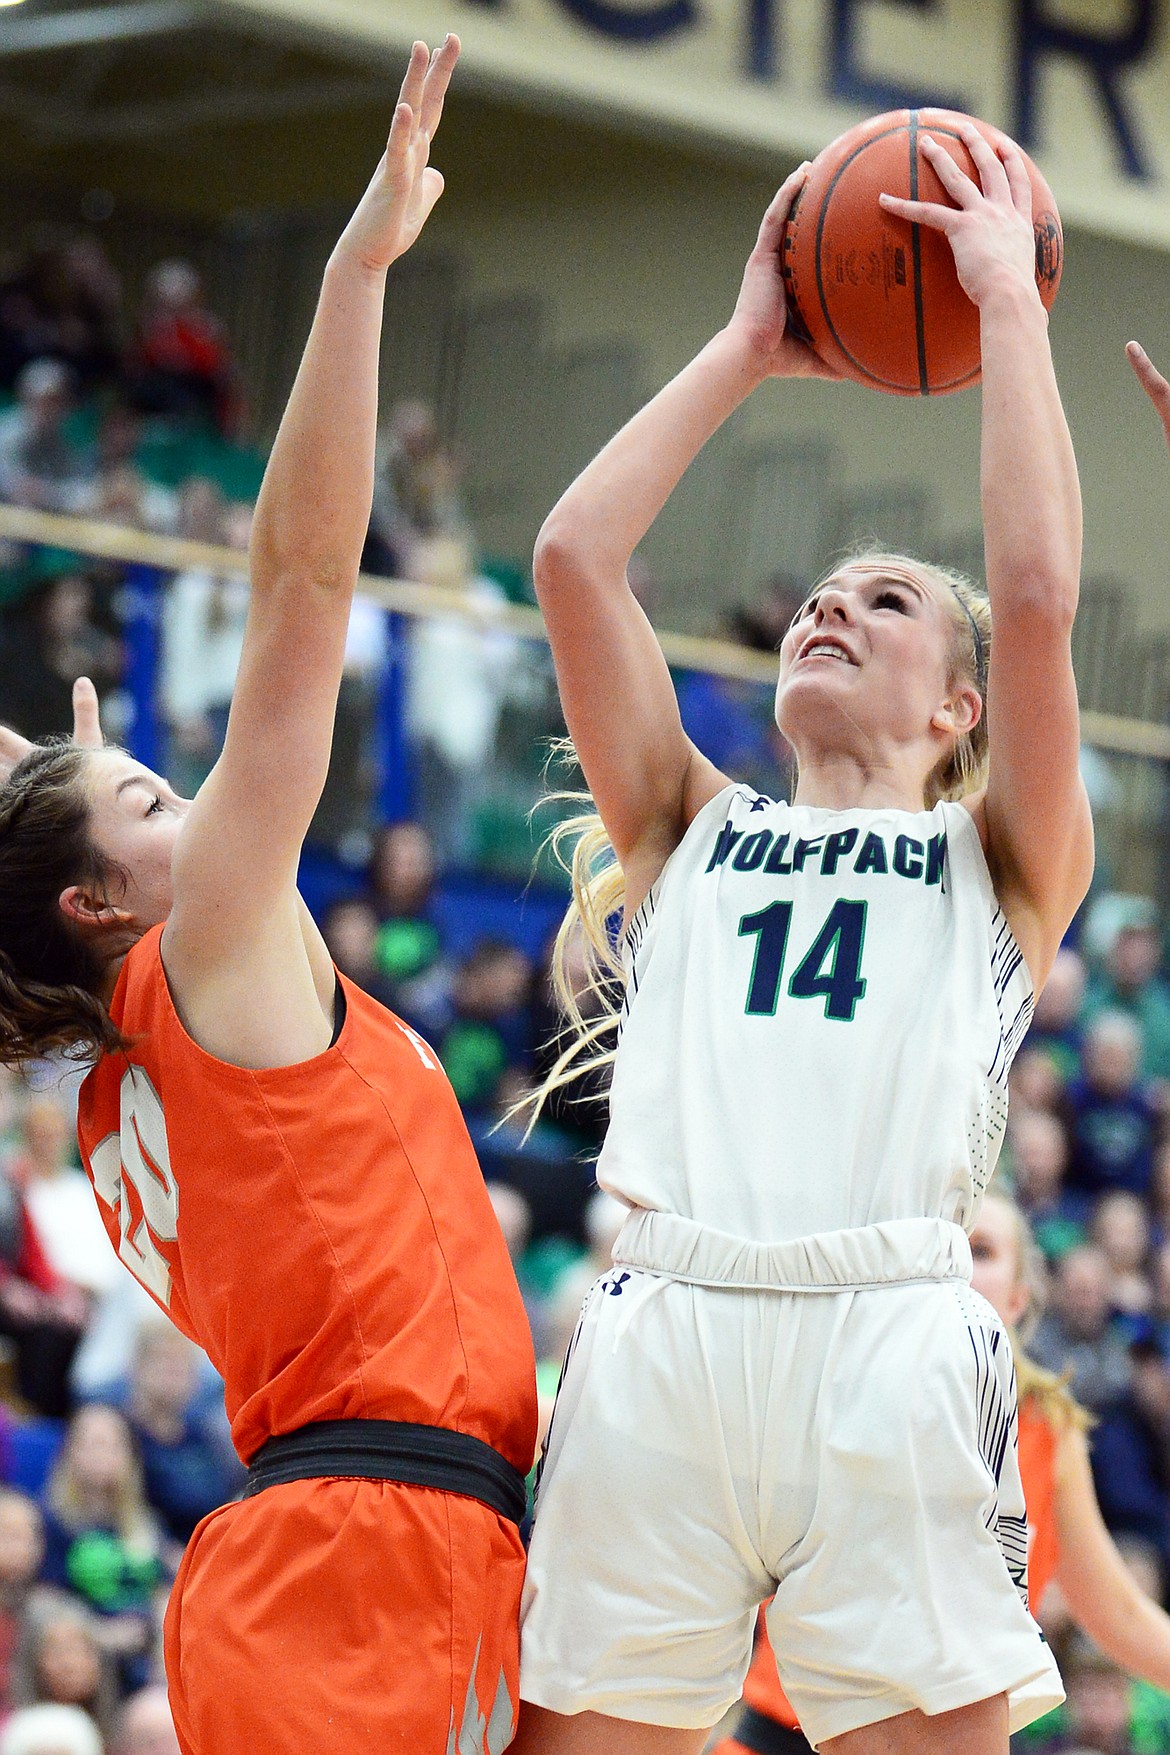 Glacier's Aubrie Rademacher (14) looks to shoot against Flathead's Bridget Crowley (20) during a crosstown matchup at Glacier High School on Friday. (Casey Kreider/Daily Inter Lake)